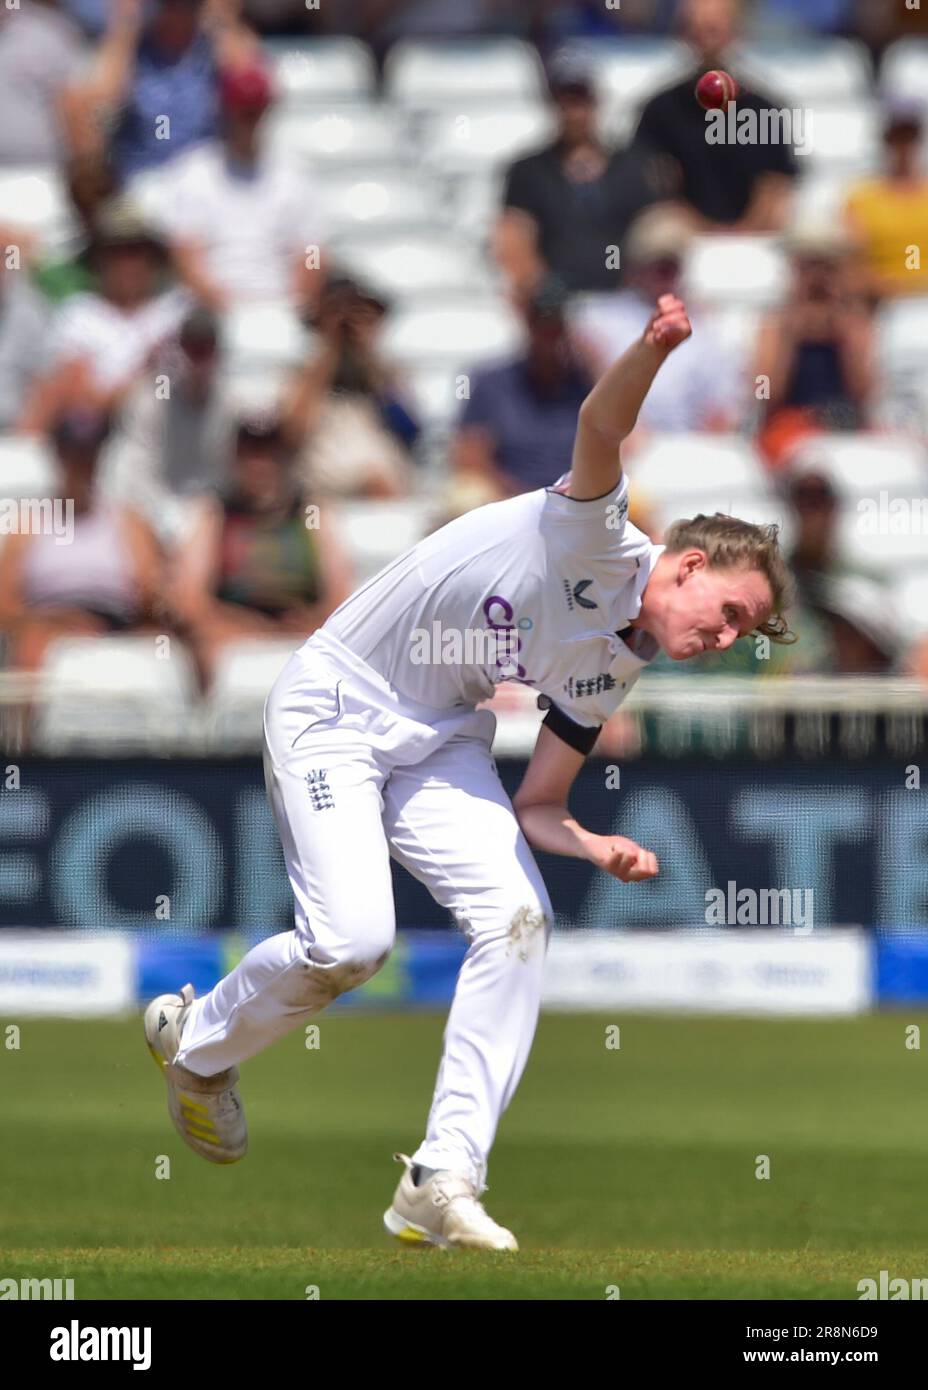 Nottingham UK. 22 June 2023. England Ladies v Australia Ladies in the Ashes Cricket Test Match.   Lauren Filer (England) bowling.  Picture: Mark Dunn/Alamy Live News, Stock Photo